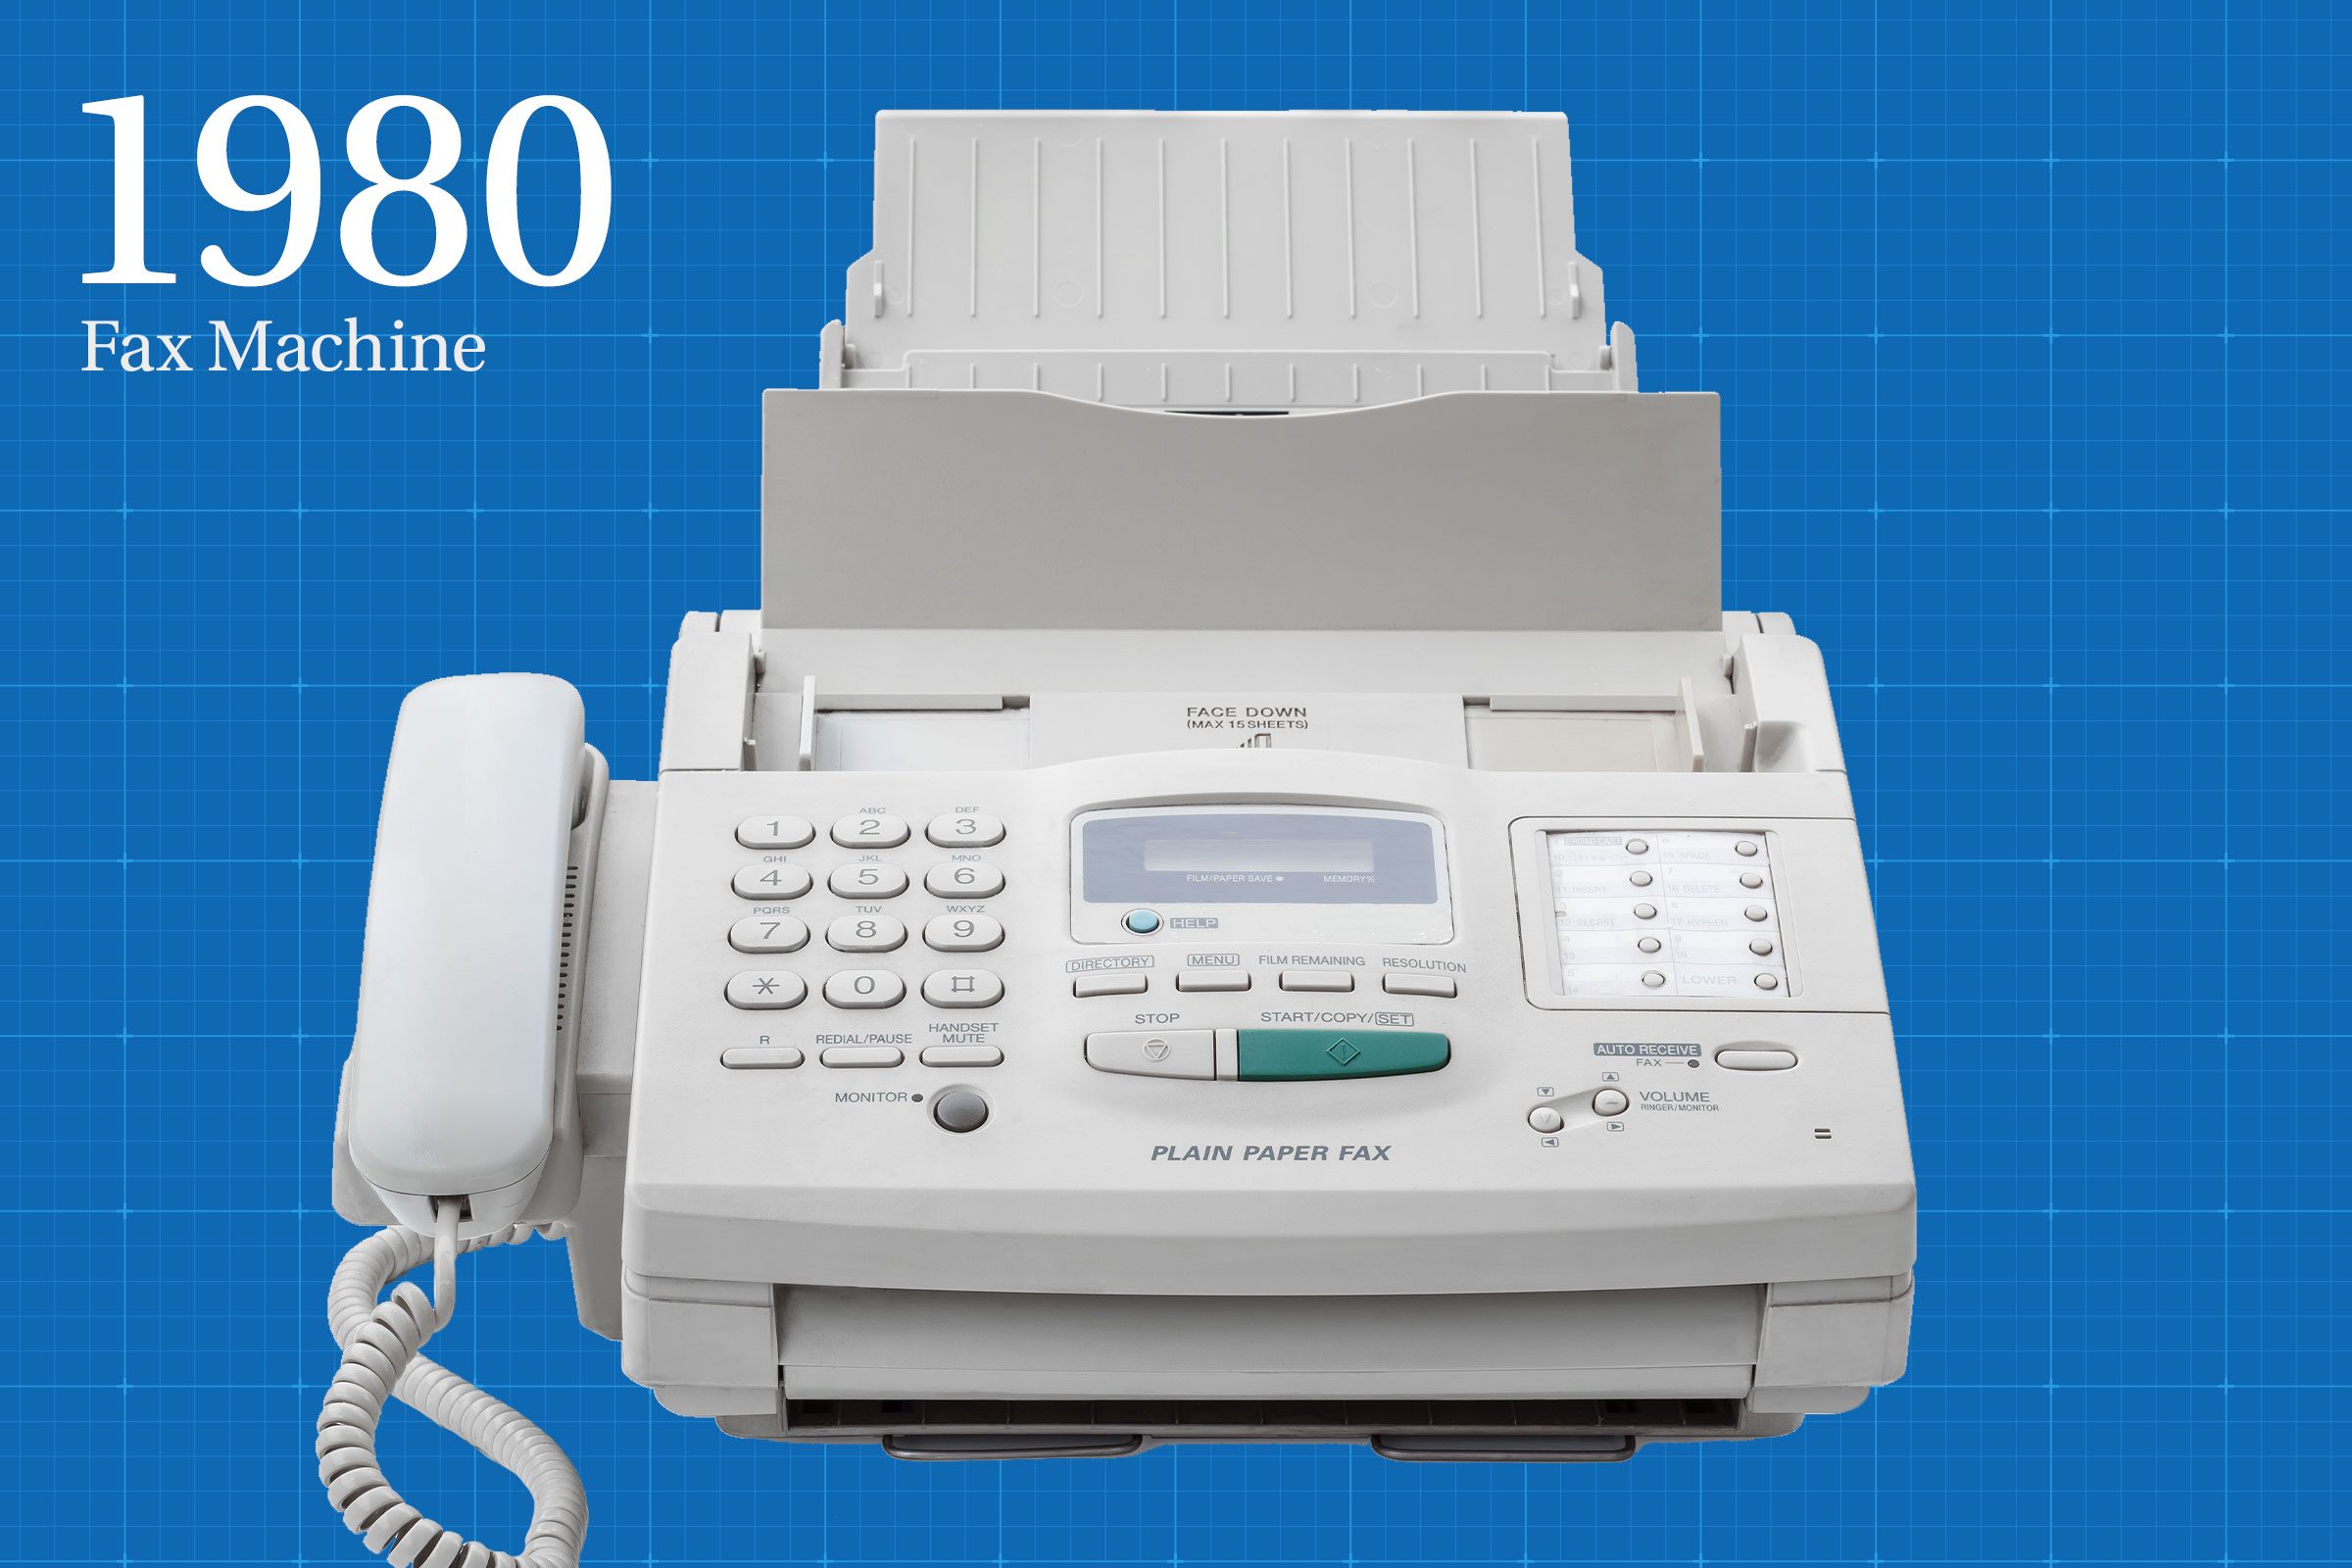 What Year Birthed the Fax Machine?